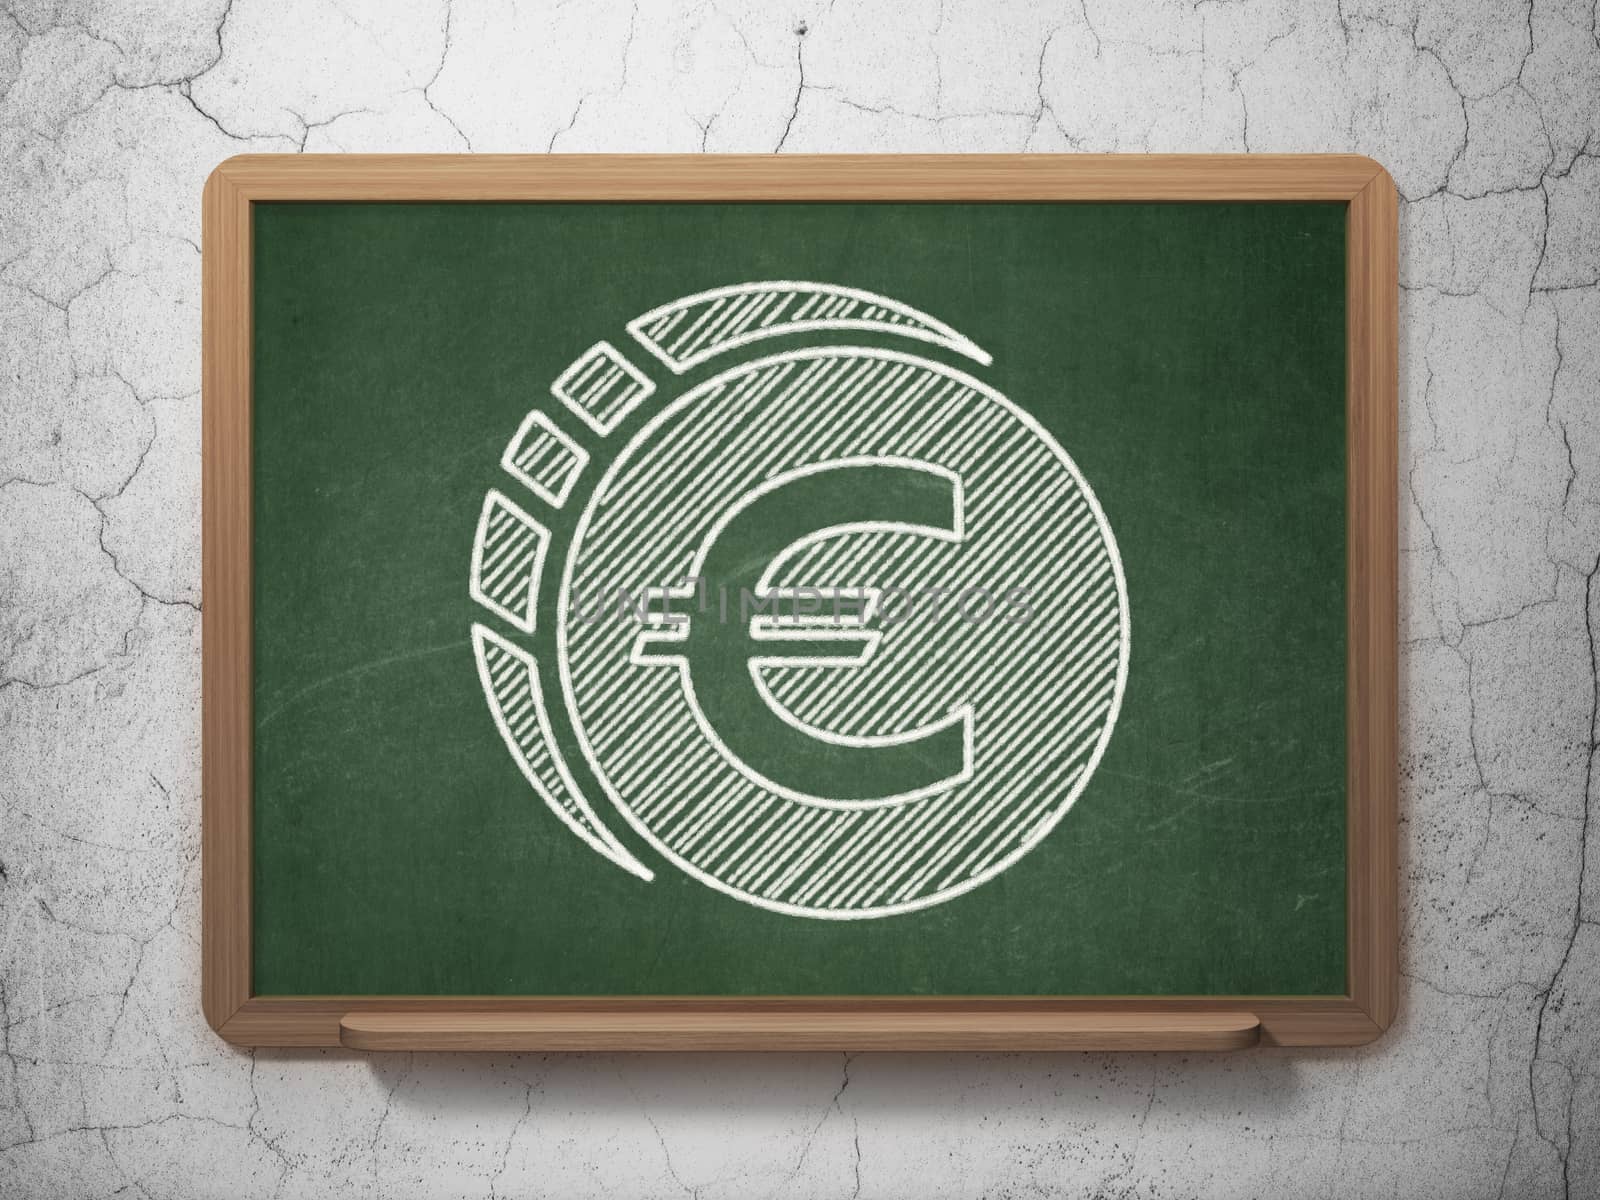 Banking concept: Euro Coin icon on Green chalkboard on grunge wall background